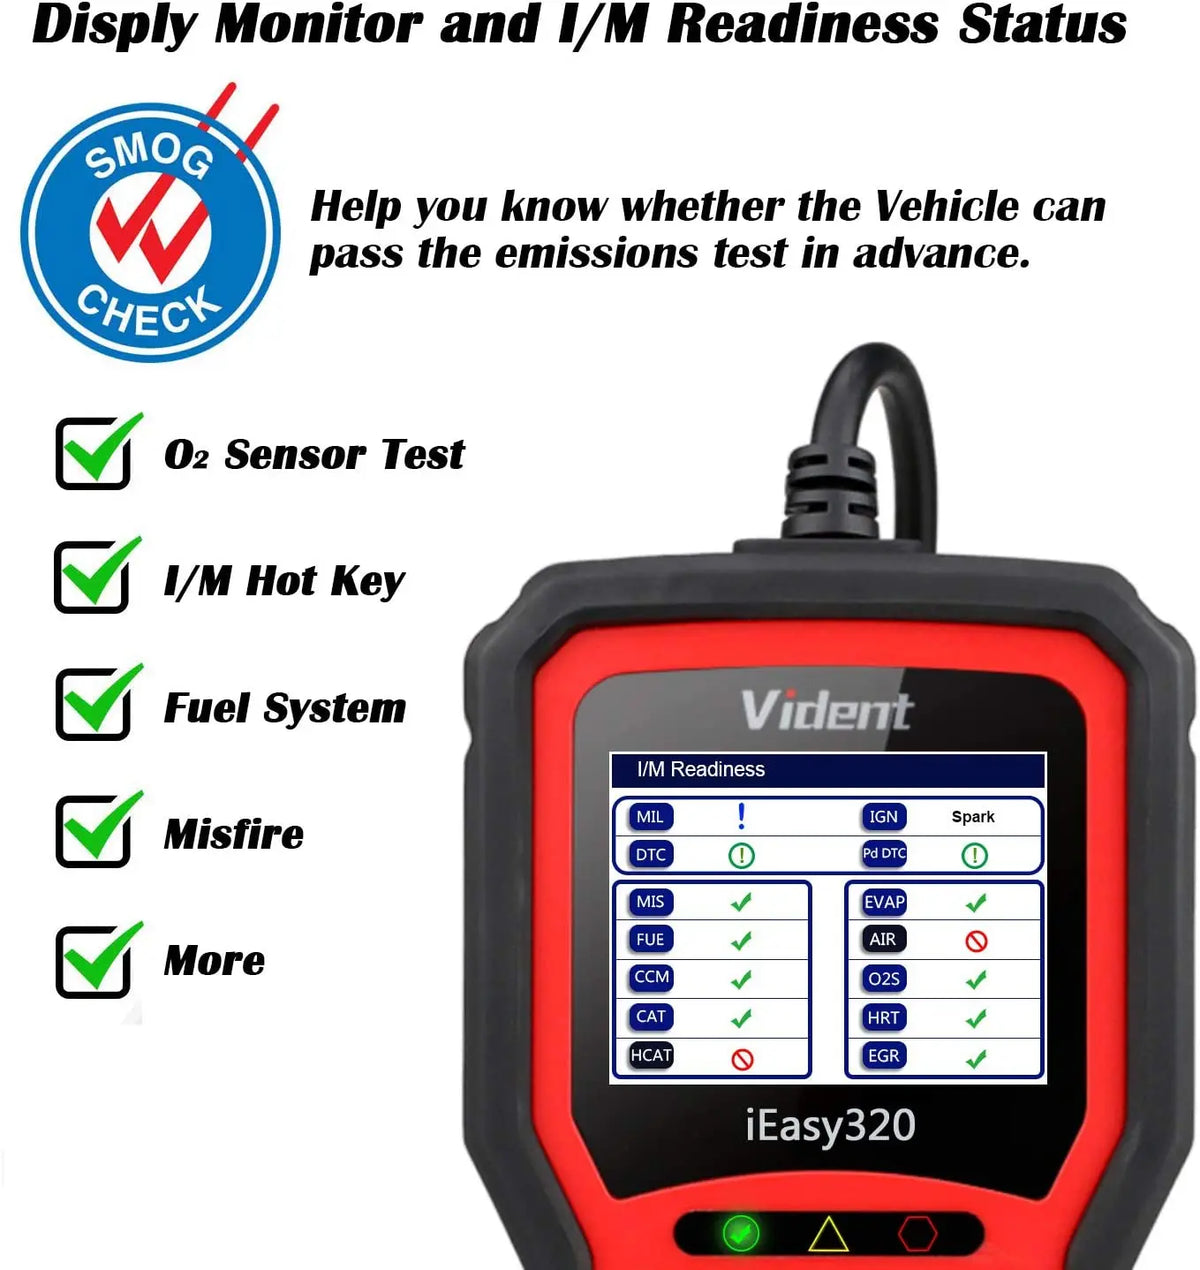 Vident iEasy320HD For Heavy Diesel Vehicles Vident